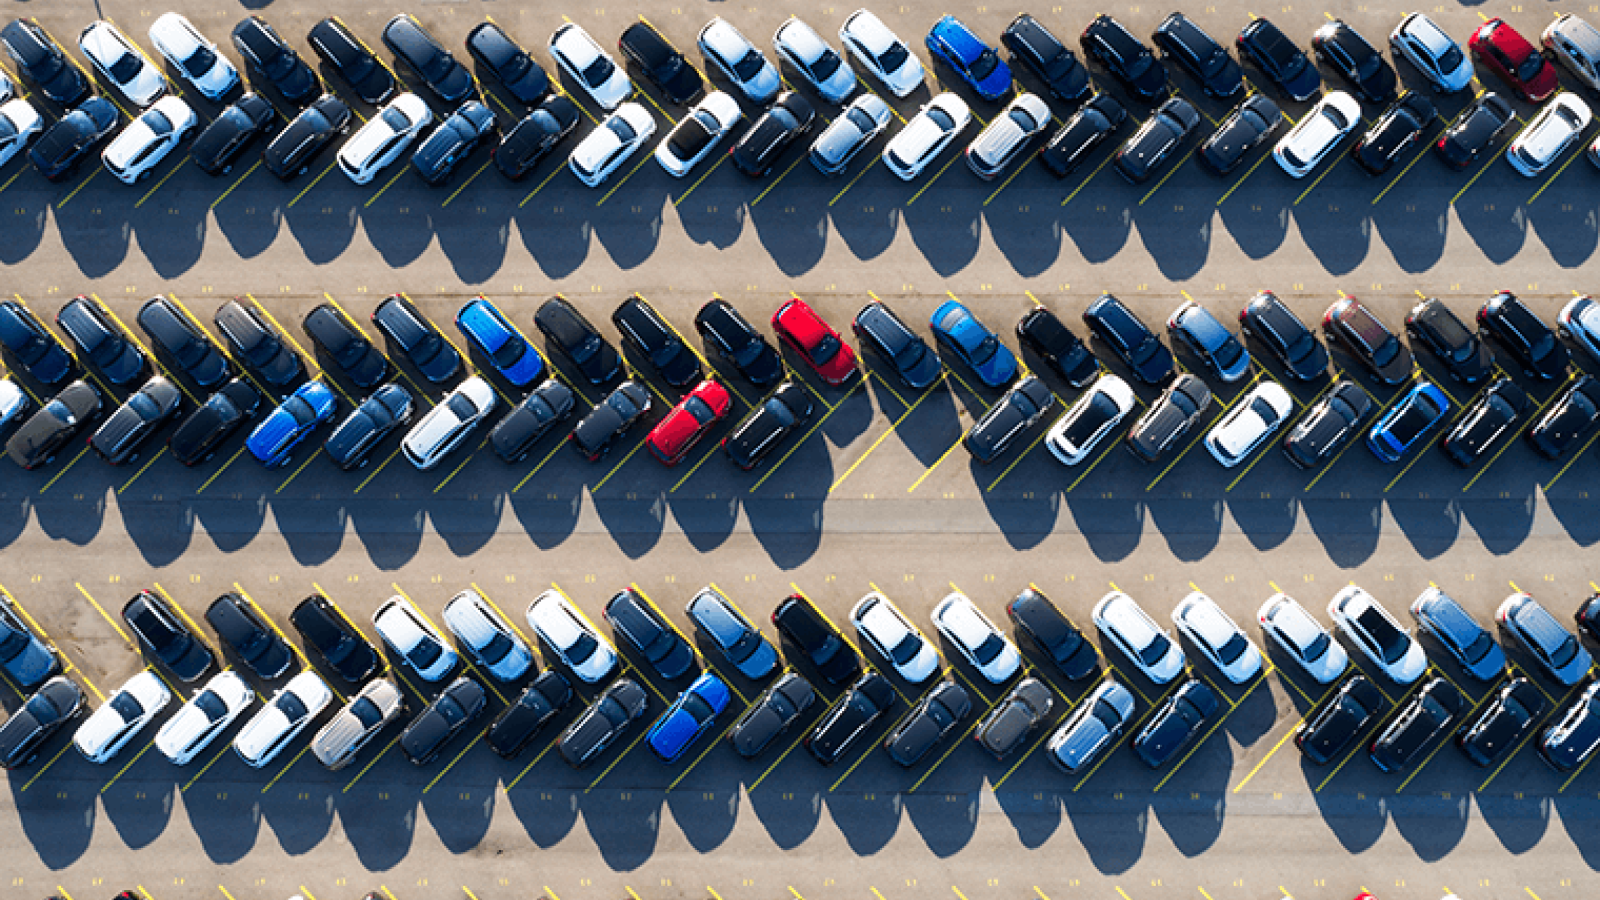 Parked cars